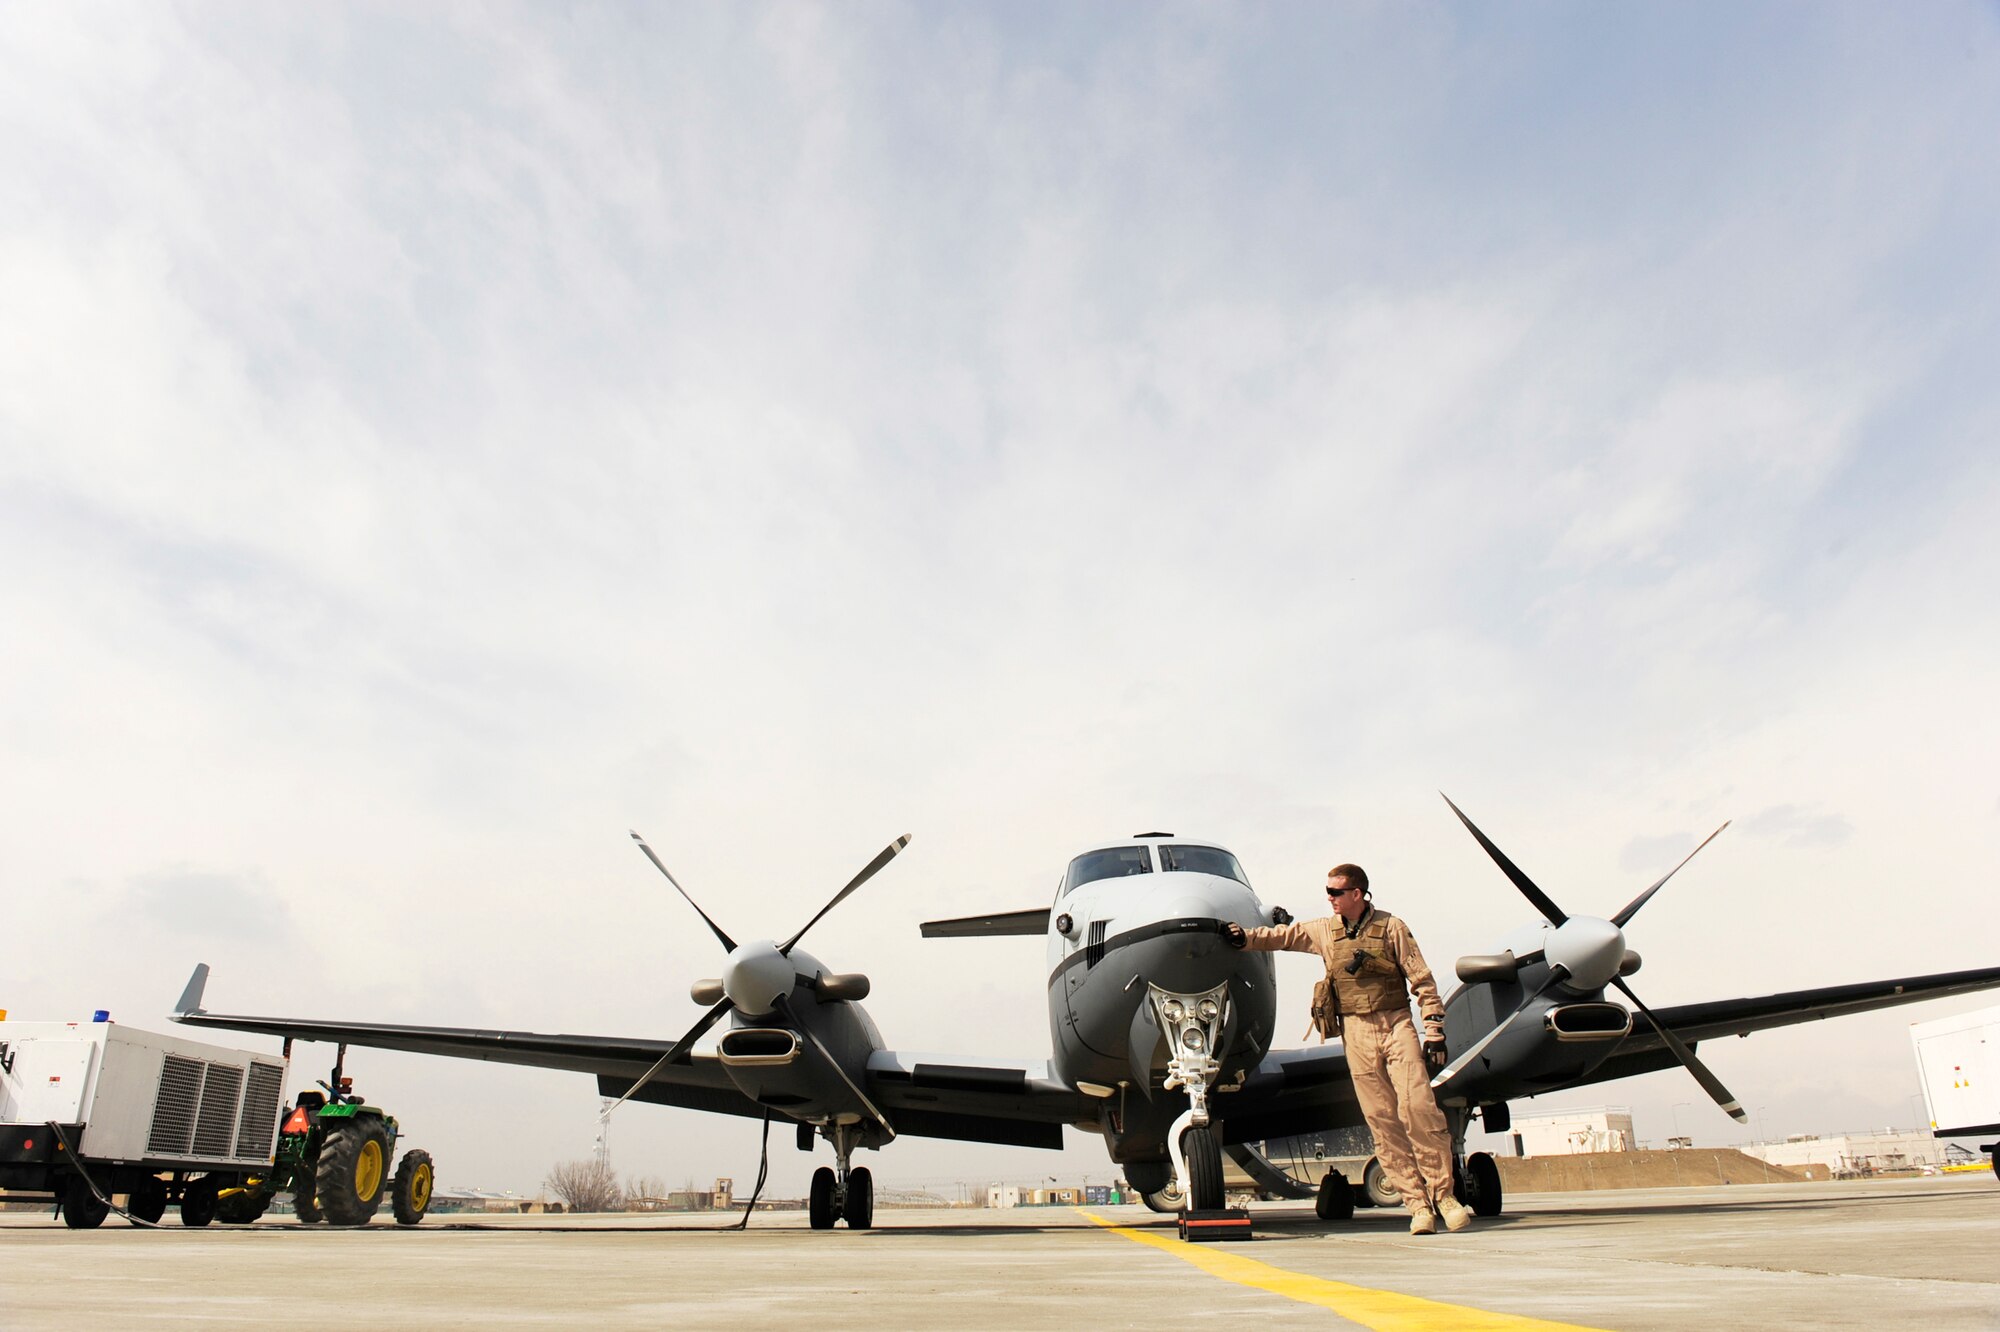 Lt. Col. Douglas J. Lee, the commander of the 4th Expeditionary Reconnaissance Squadron at Bagram Airfield, Afghanistan, performs a walk-around inspection of an MC-12 Liberty Feb. 27, 2010, prior to a mission.  A four-person aircrew flies the modified King Air 350 commercial plane to provide real-time full-motion video and signals information to help military leaders make battlefield decisions.(U.S. Air Force photo/Staff Sgt. Manuel J. Martinez)